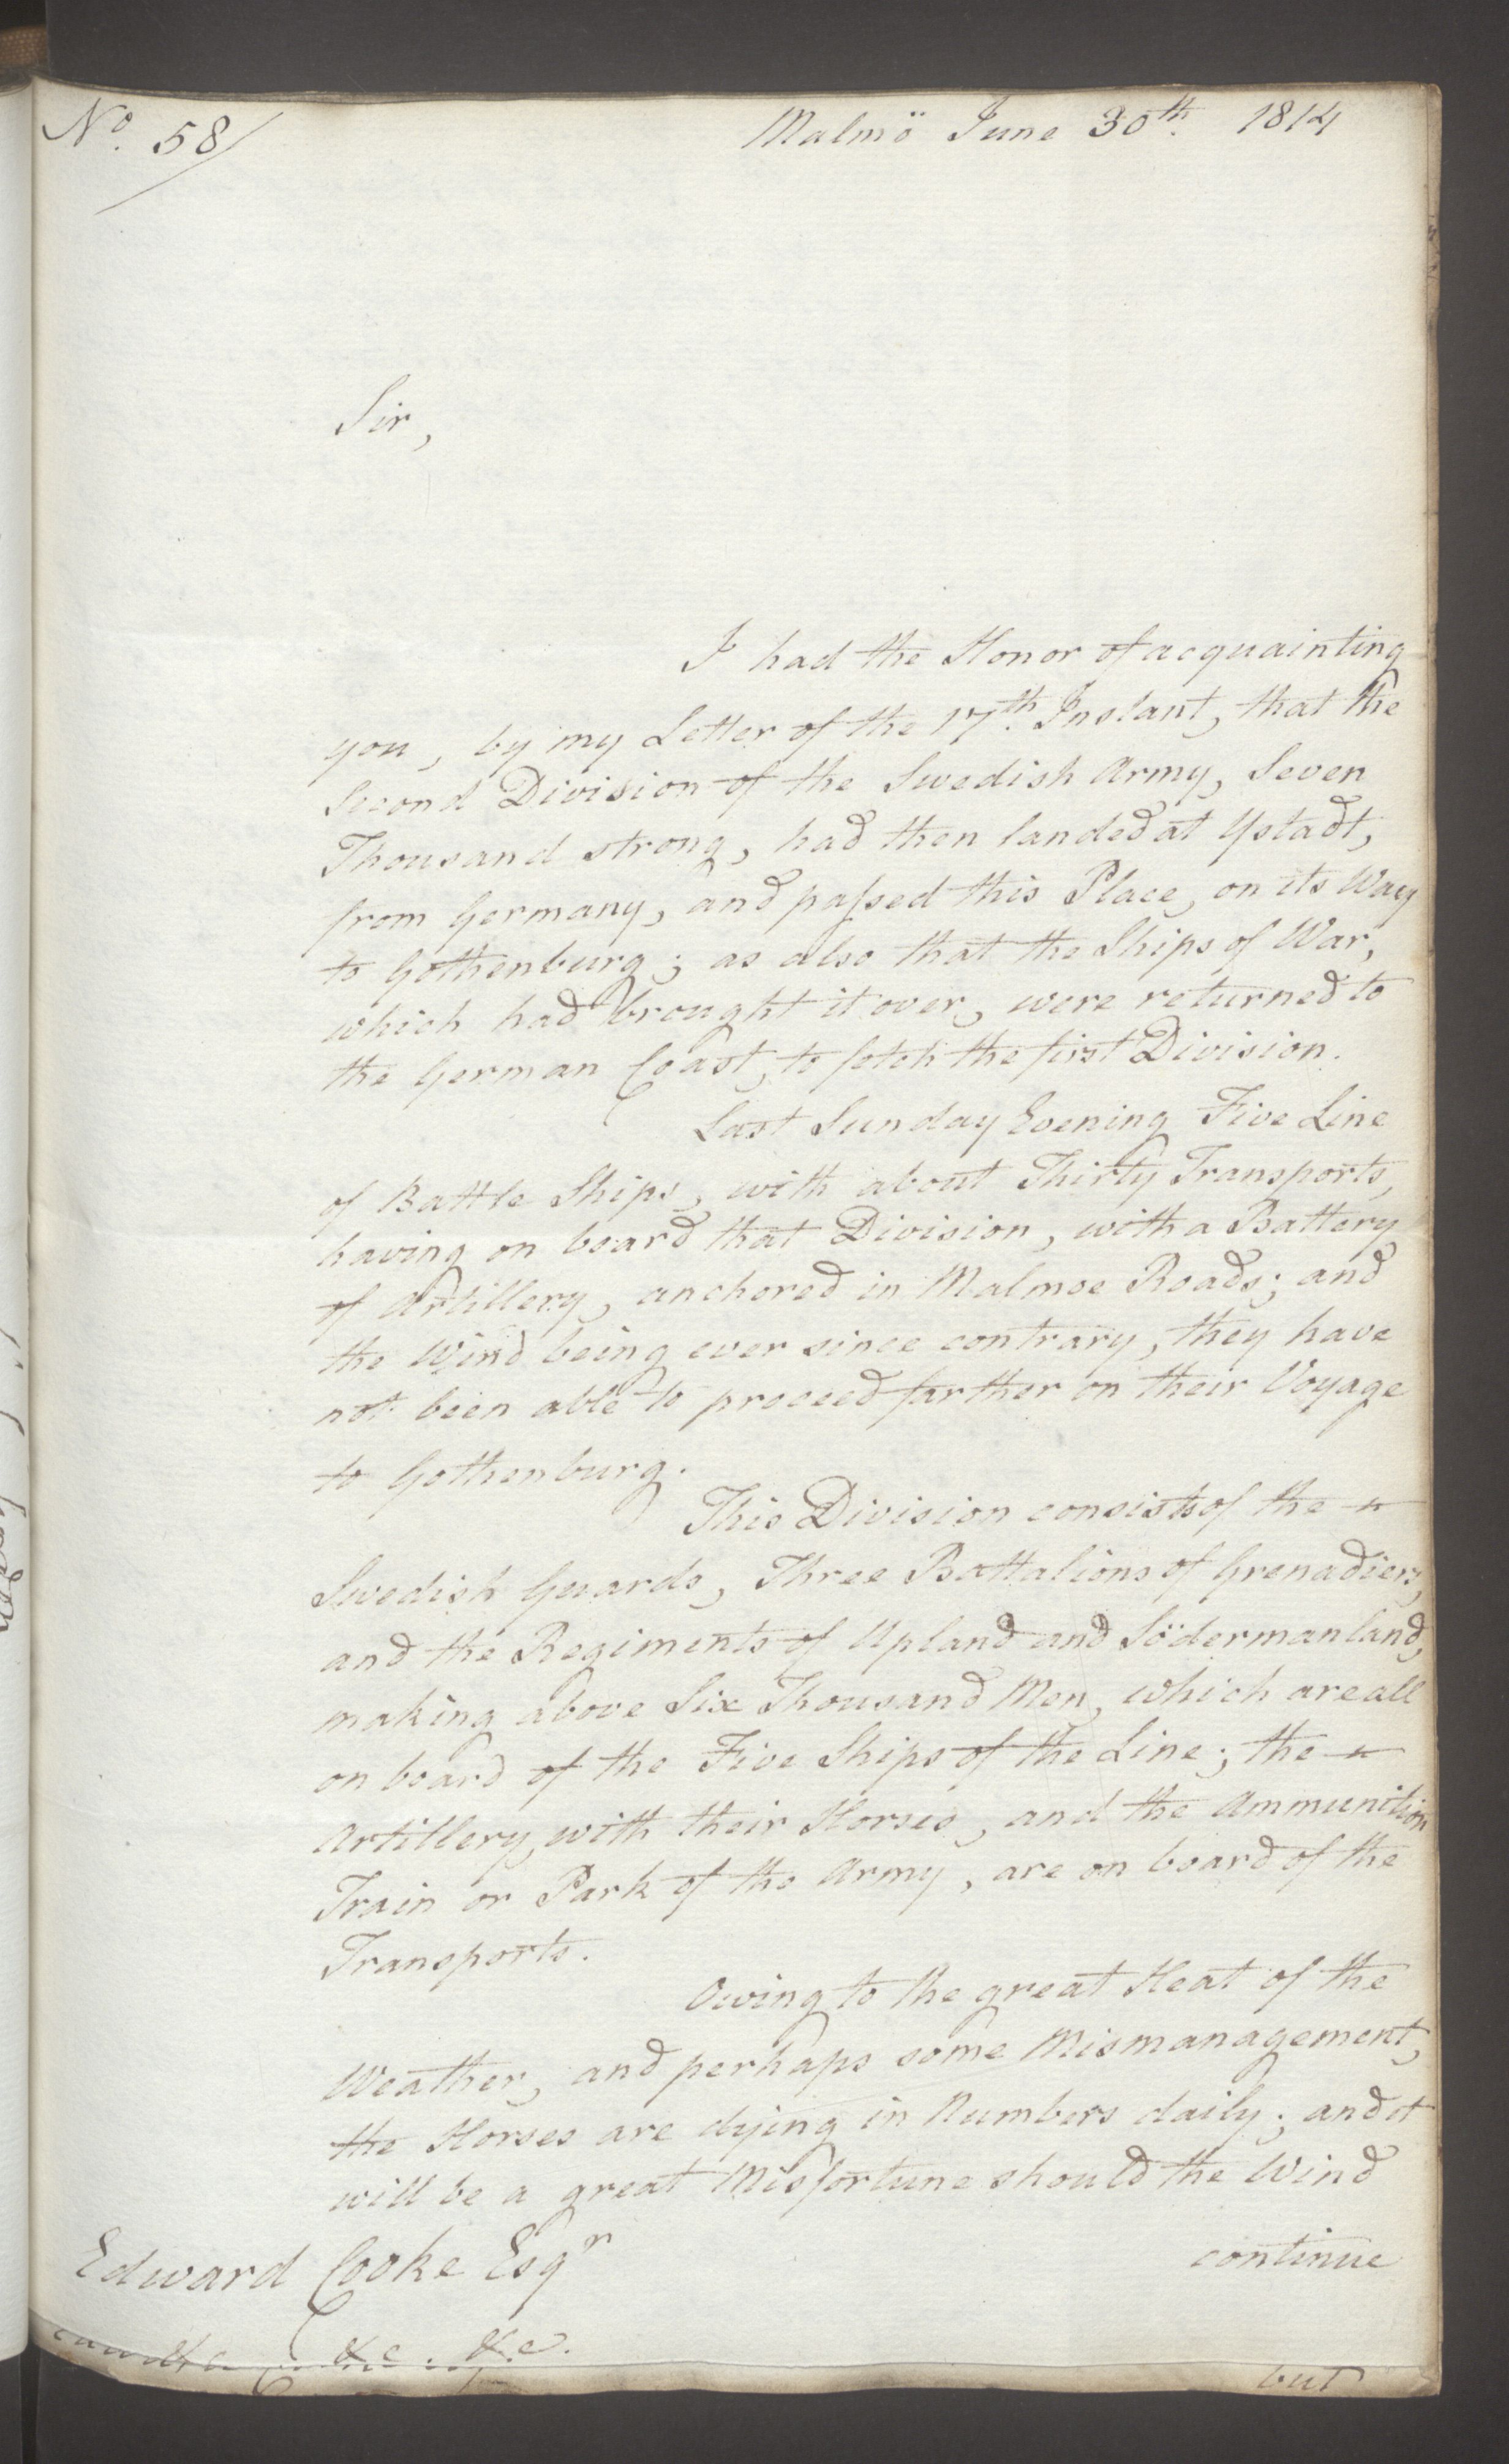 Foreign Office*, UKA/-/FO 38/16: Sir C. Gordon. Reports from Malmö, Jonkoping, and Helsingborg, 1814, s. 67